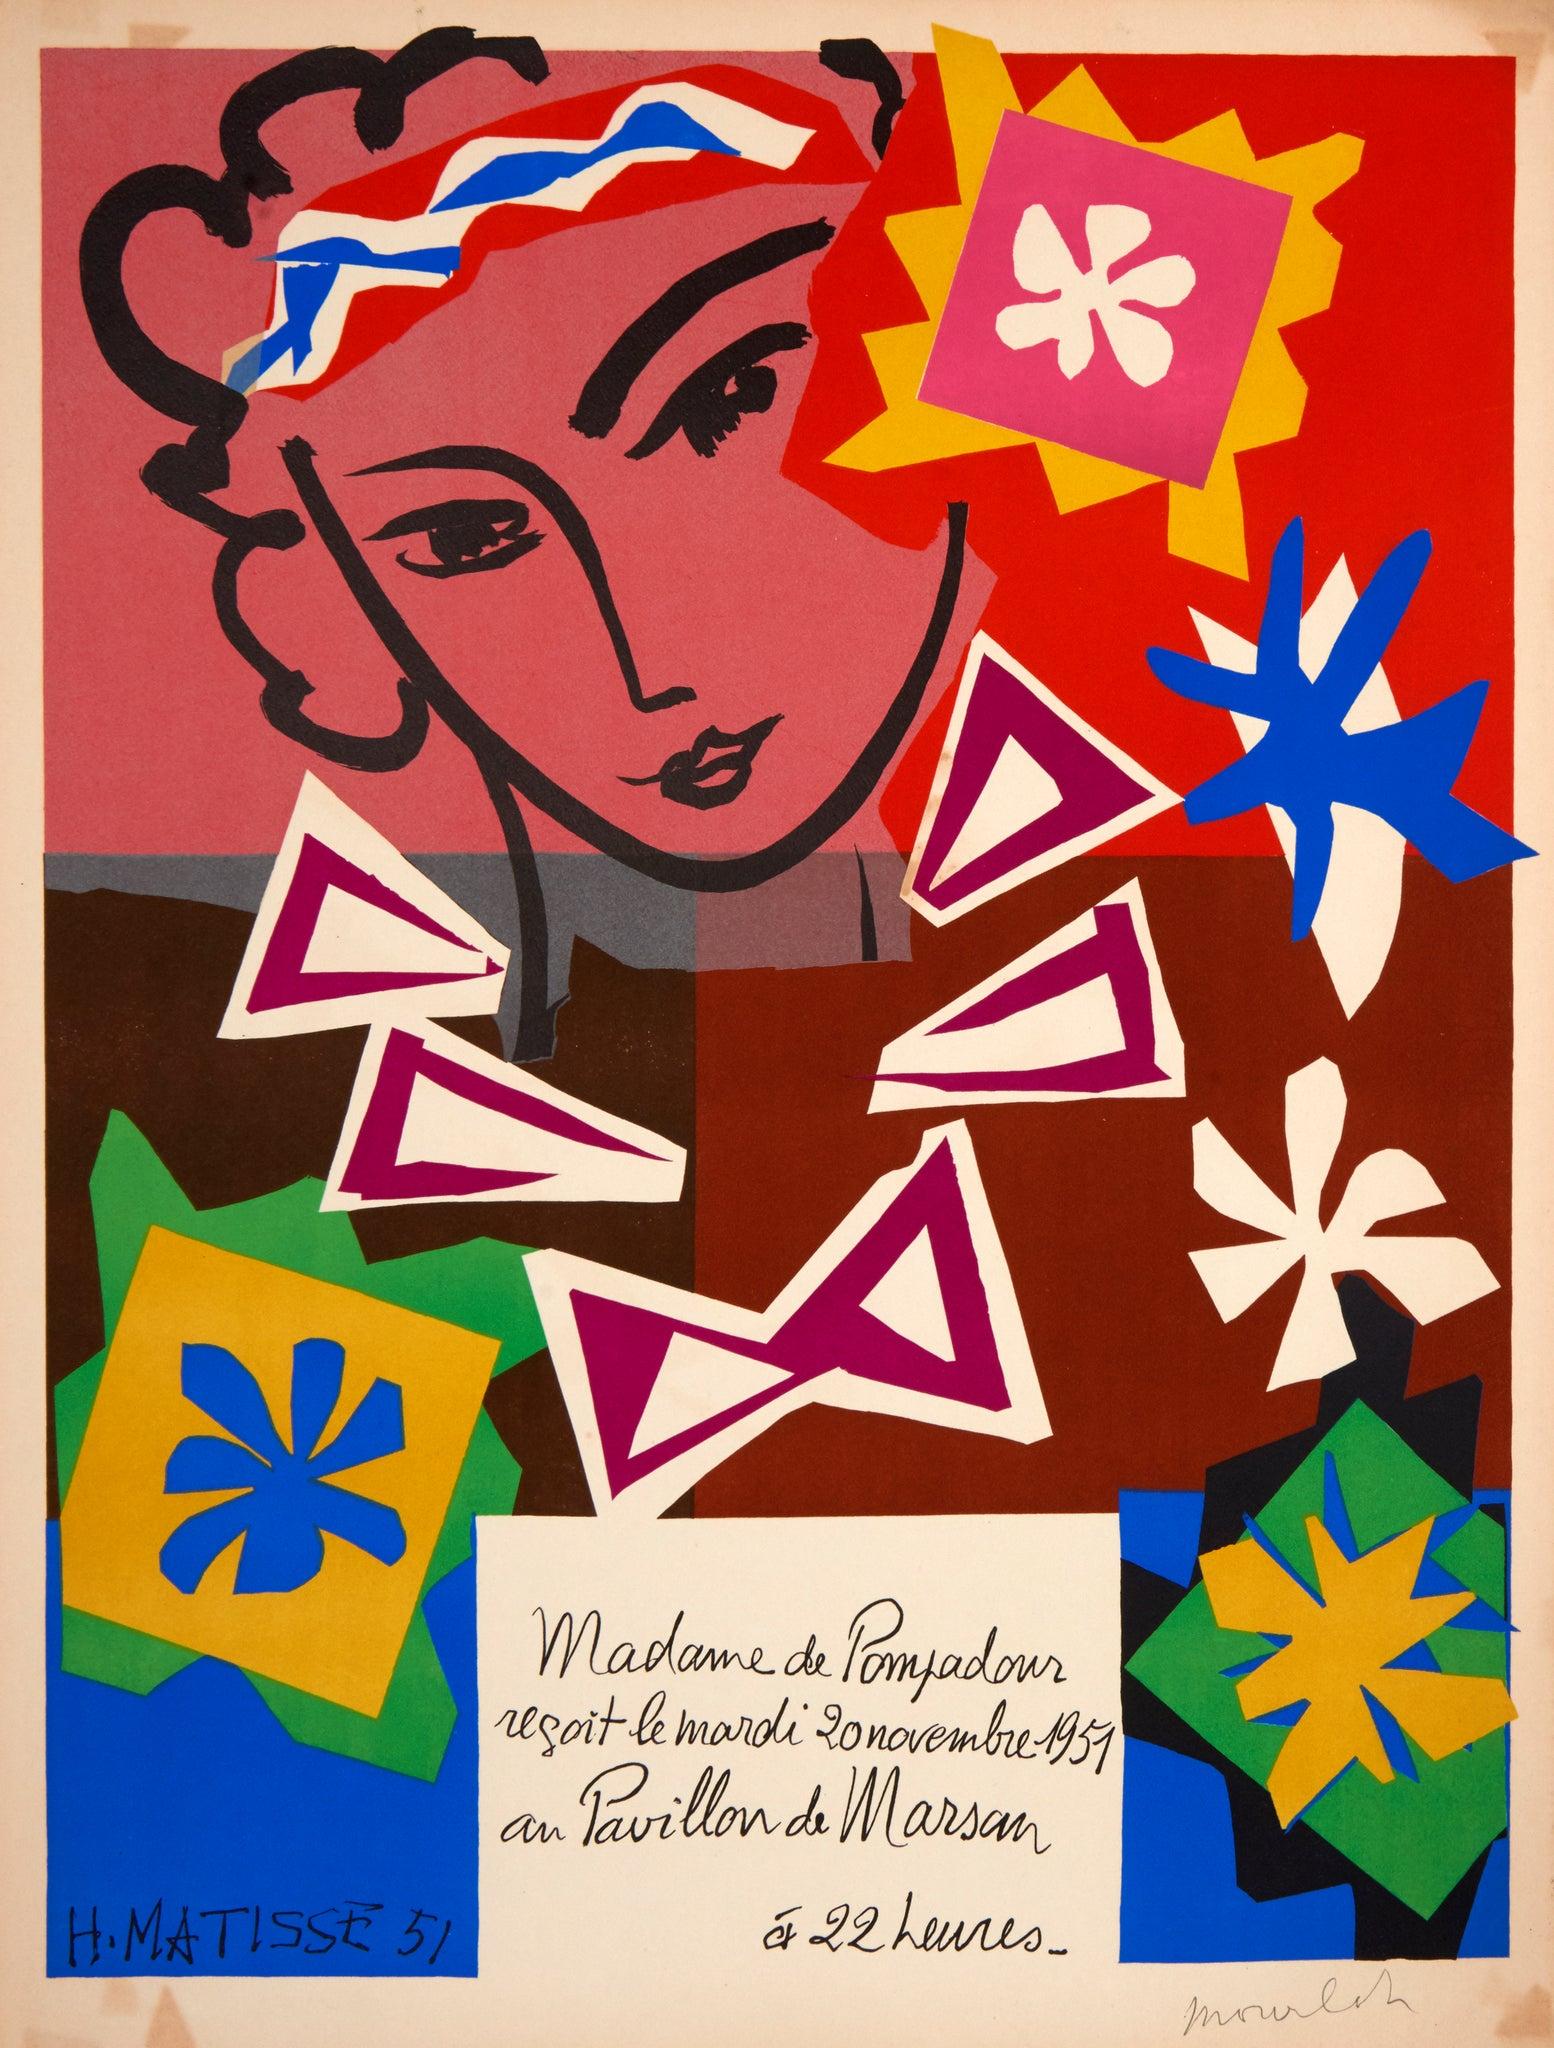 Artist: Henri Matisse

Medium: Lithographic Poster, on Arches Paper, 1951

Dimensions: 31.4 x 23.6 in, 79.76 x 59.94 cm
